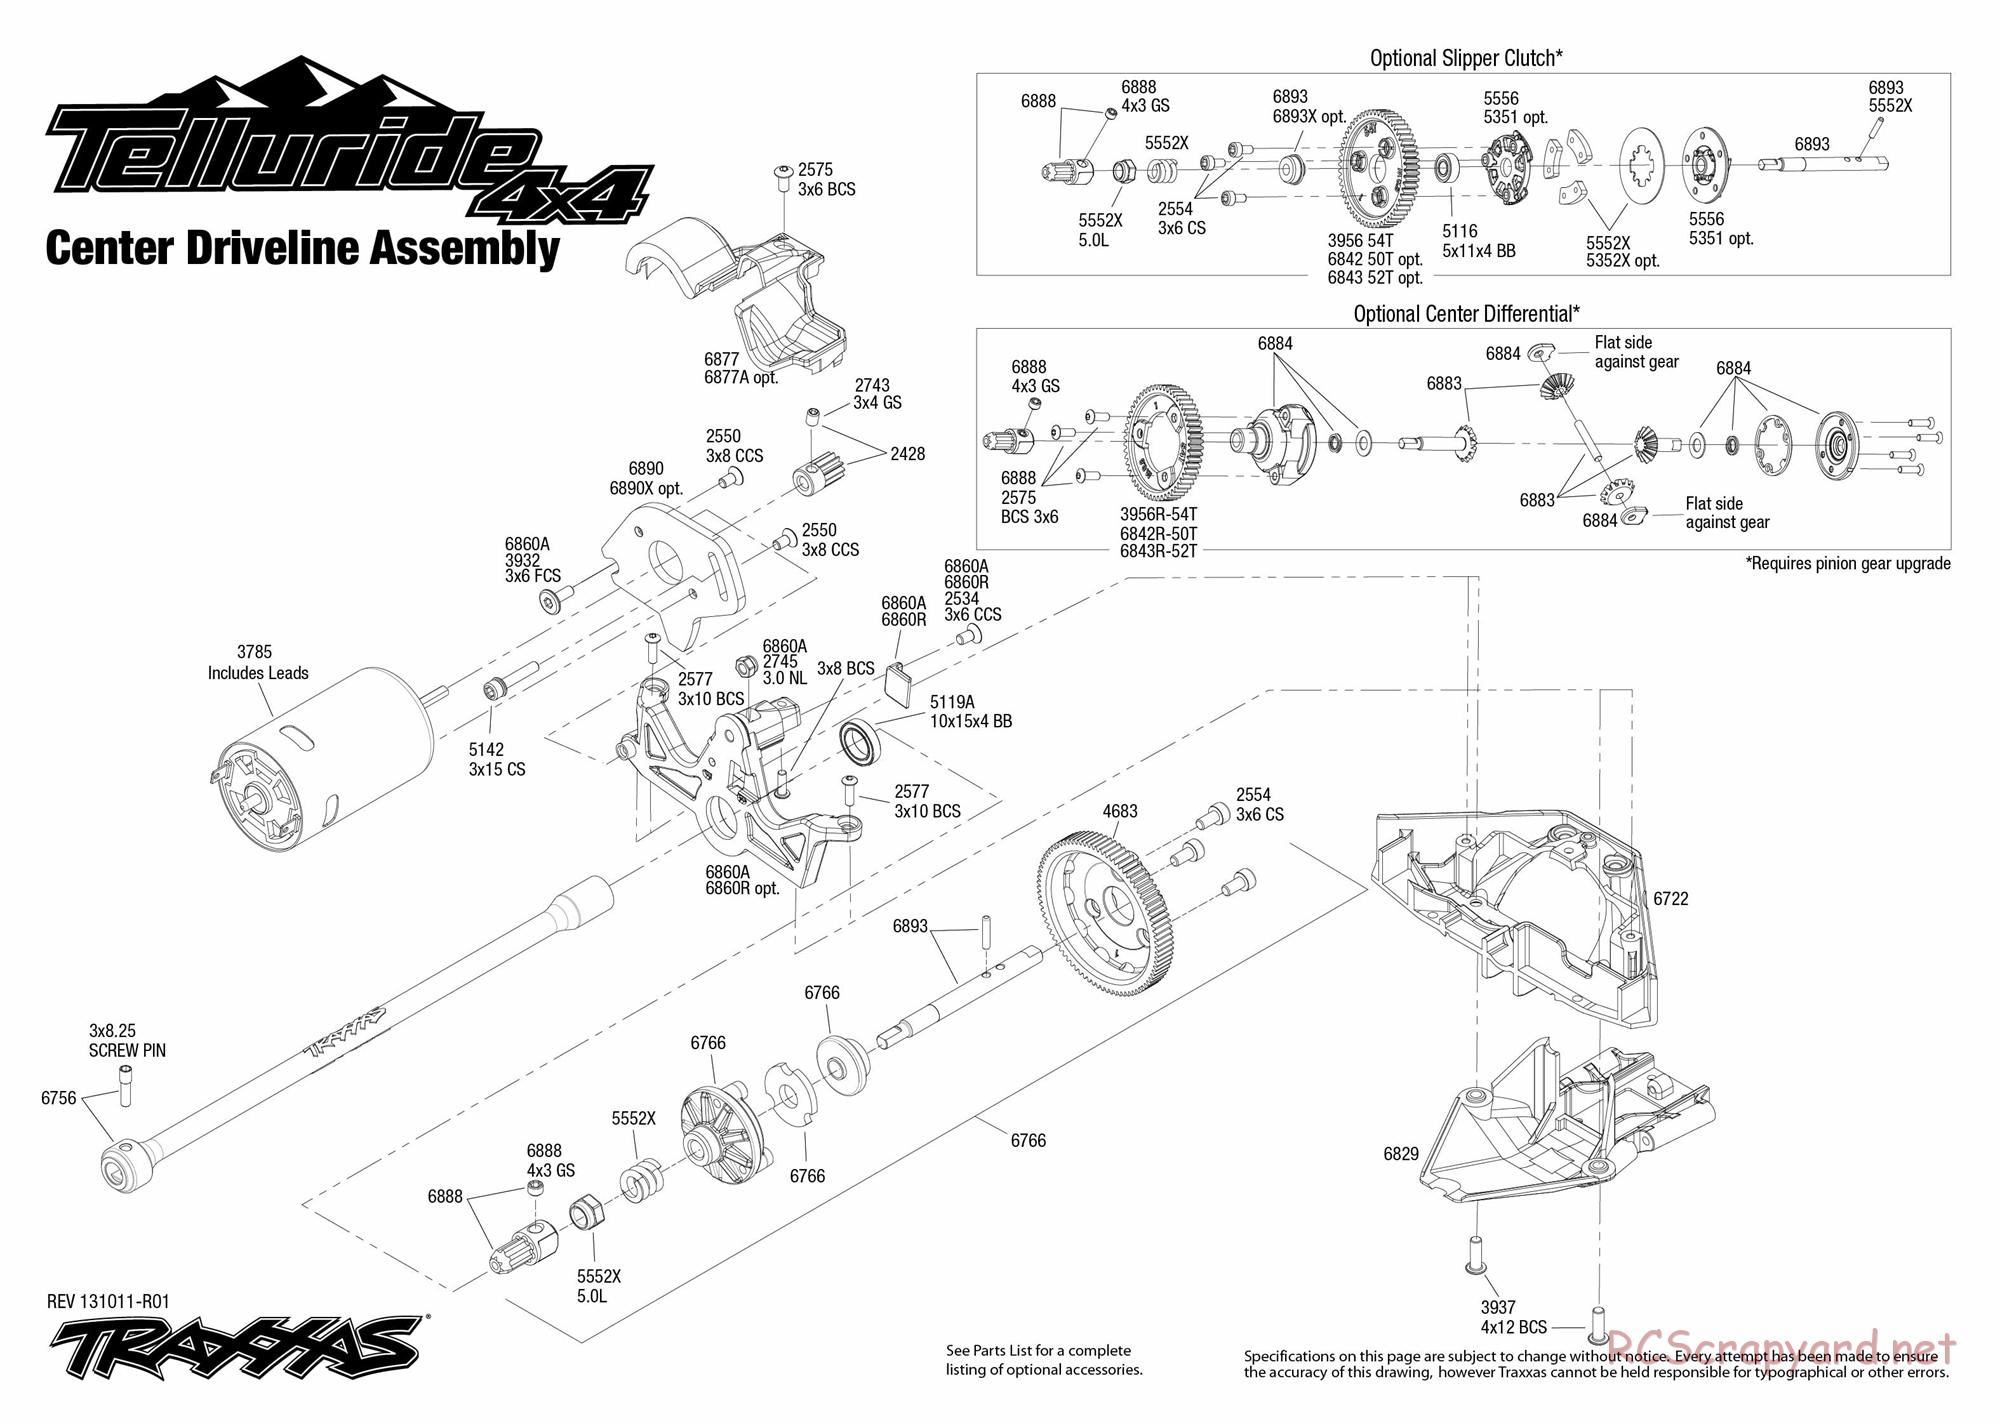 Traxxas - Telluride 4x4 (2013) - Exploded Views - Page 5